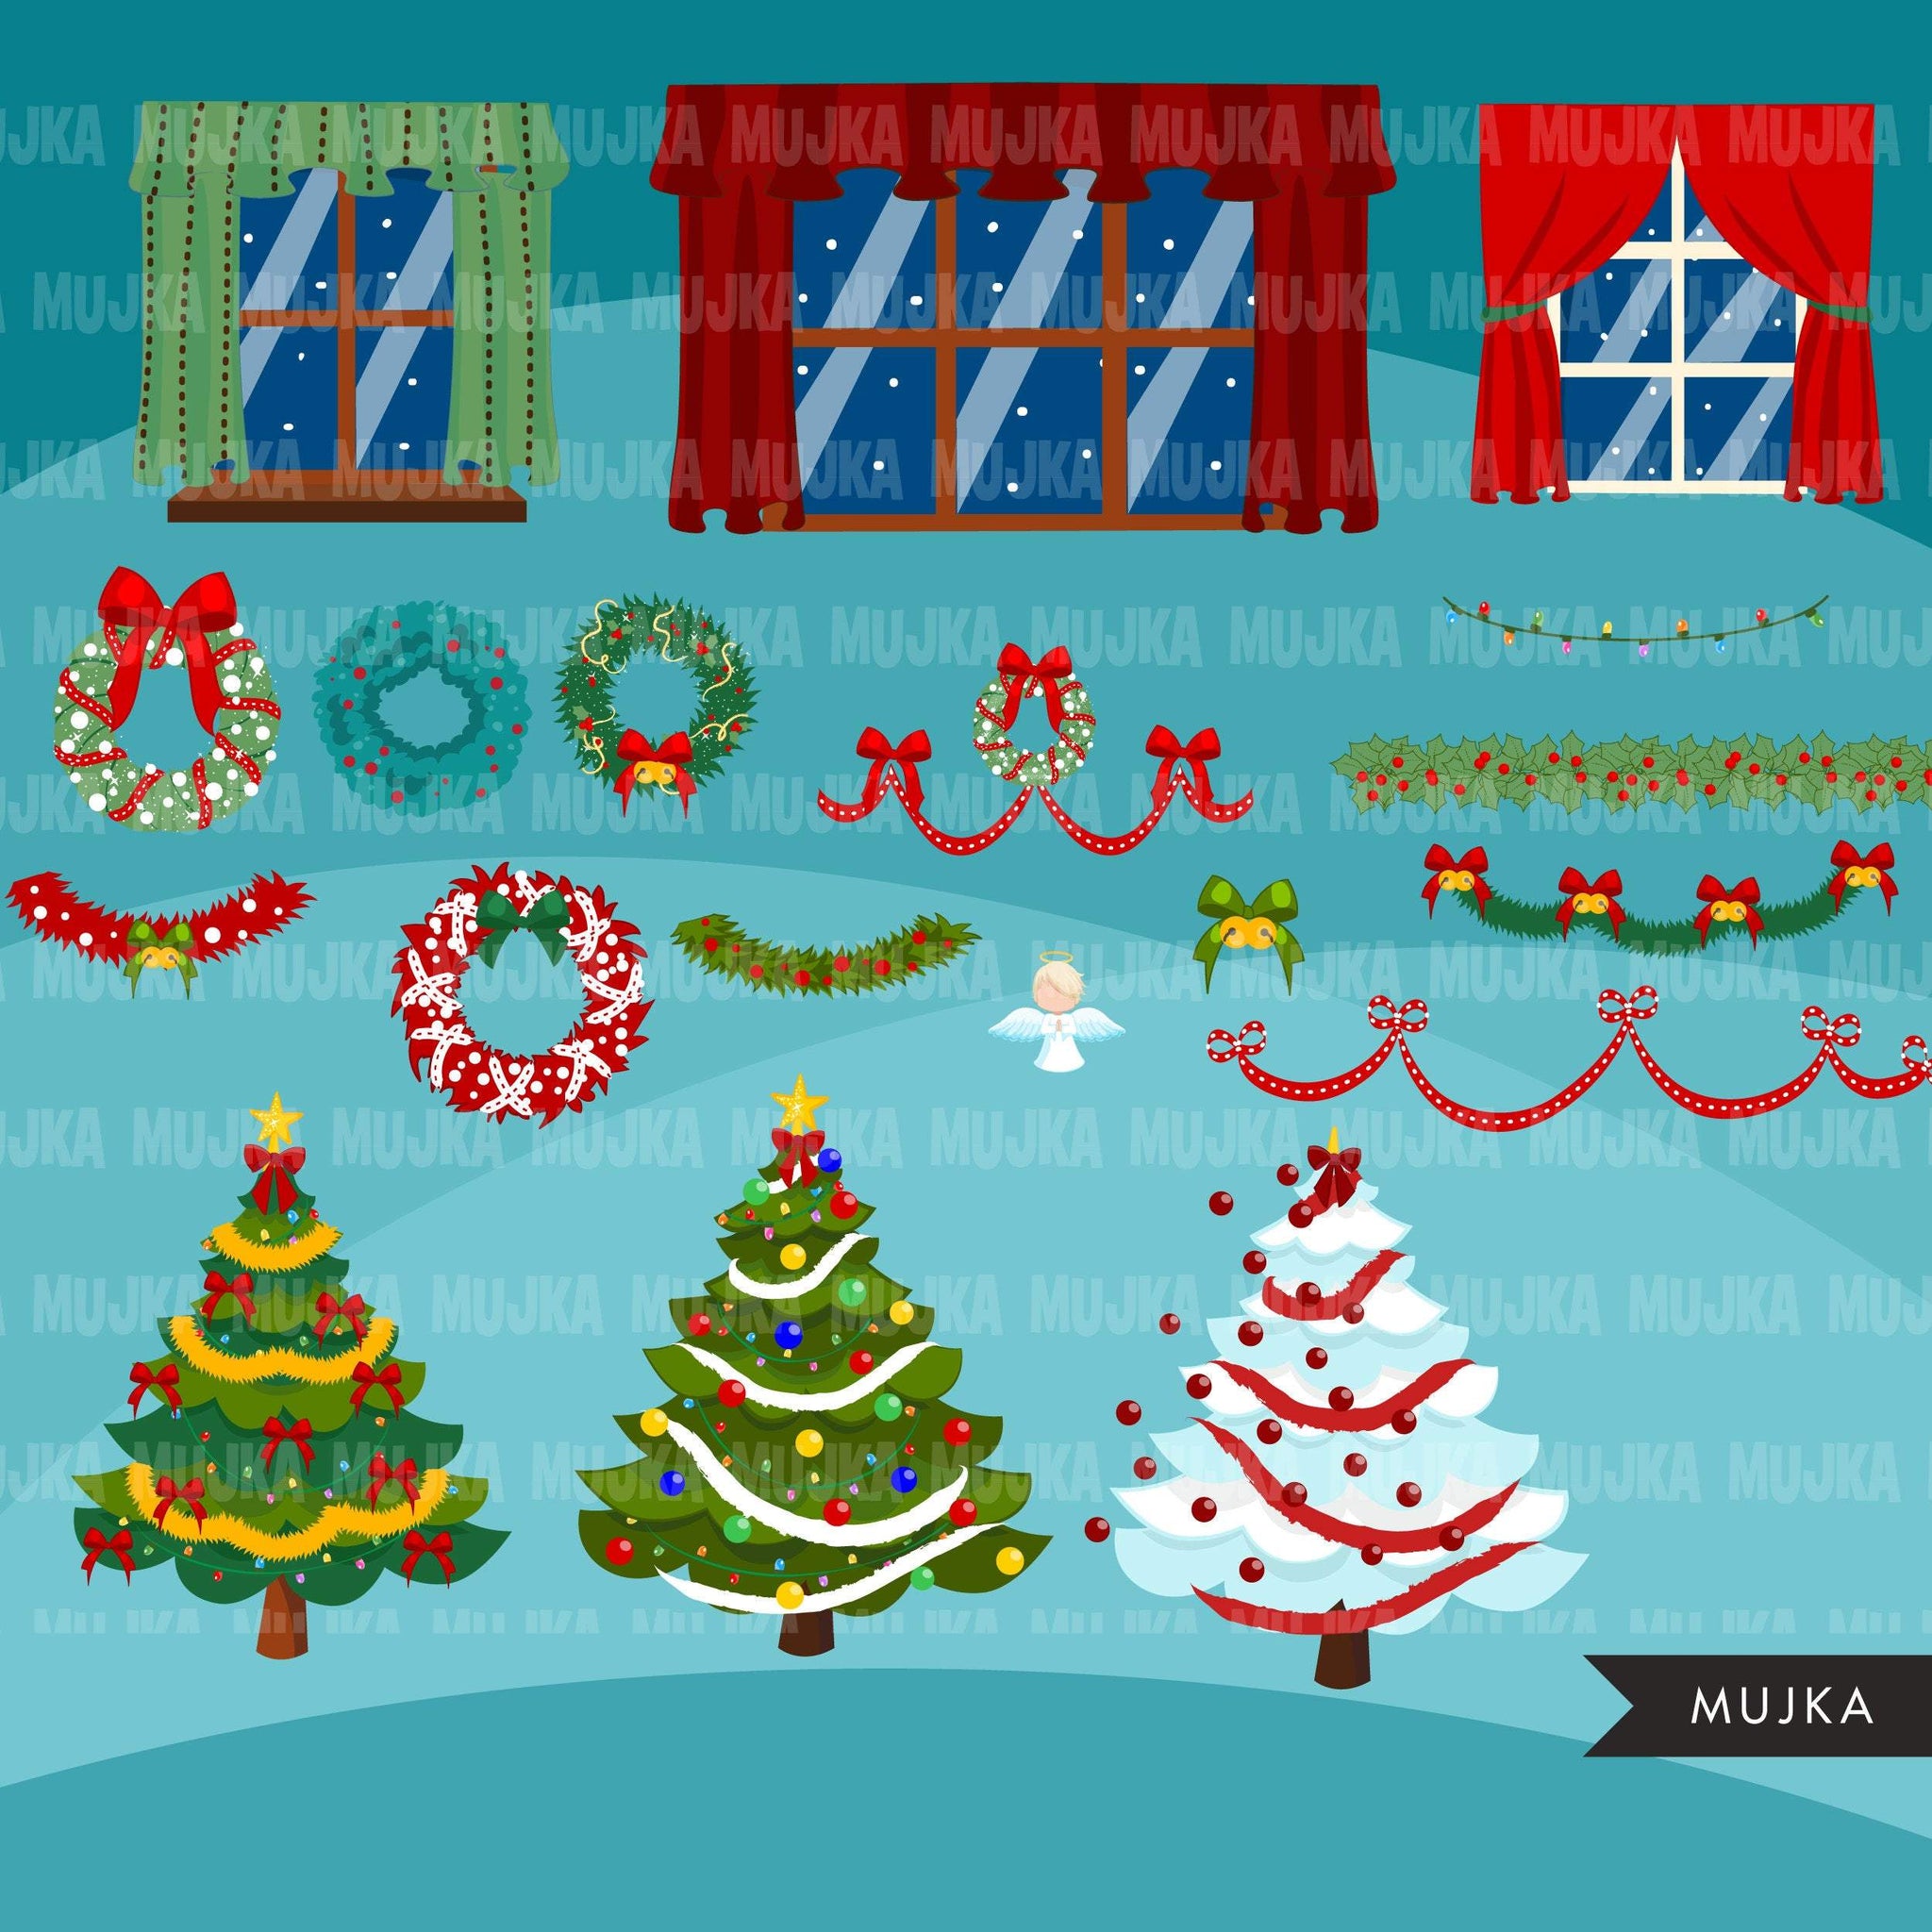 Christmas Clipart, Christmas living room creator, Christmas trees, fireplace, giftboxes png clip art, commercial use sublimation graphics